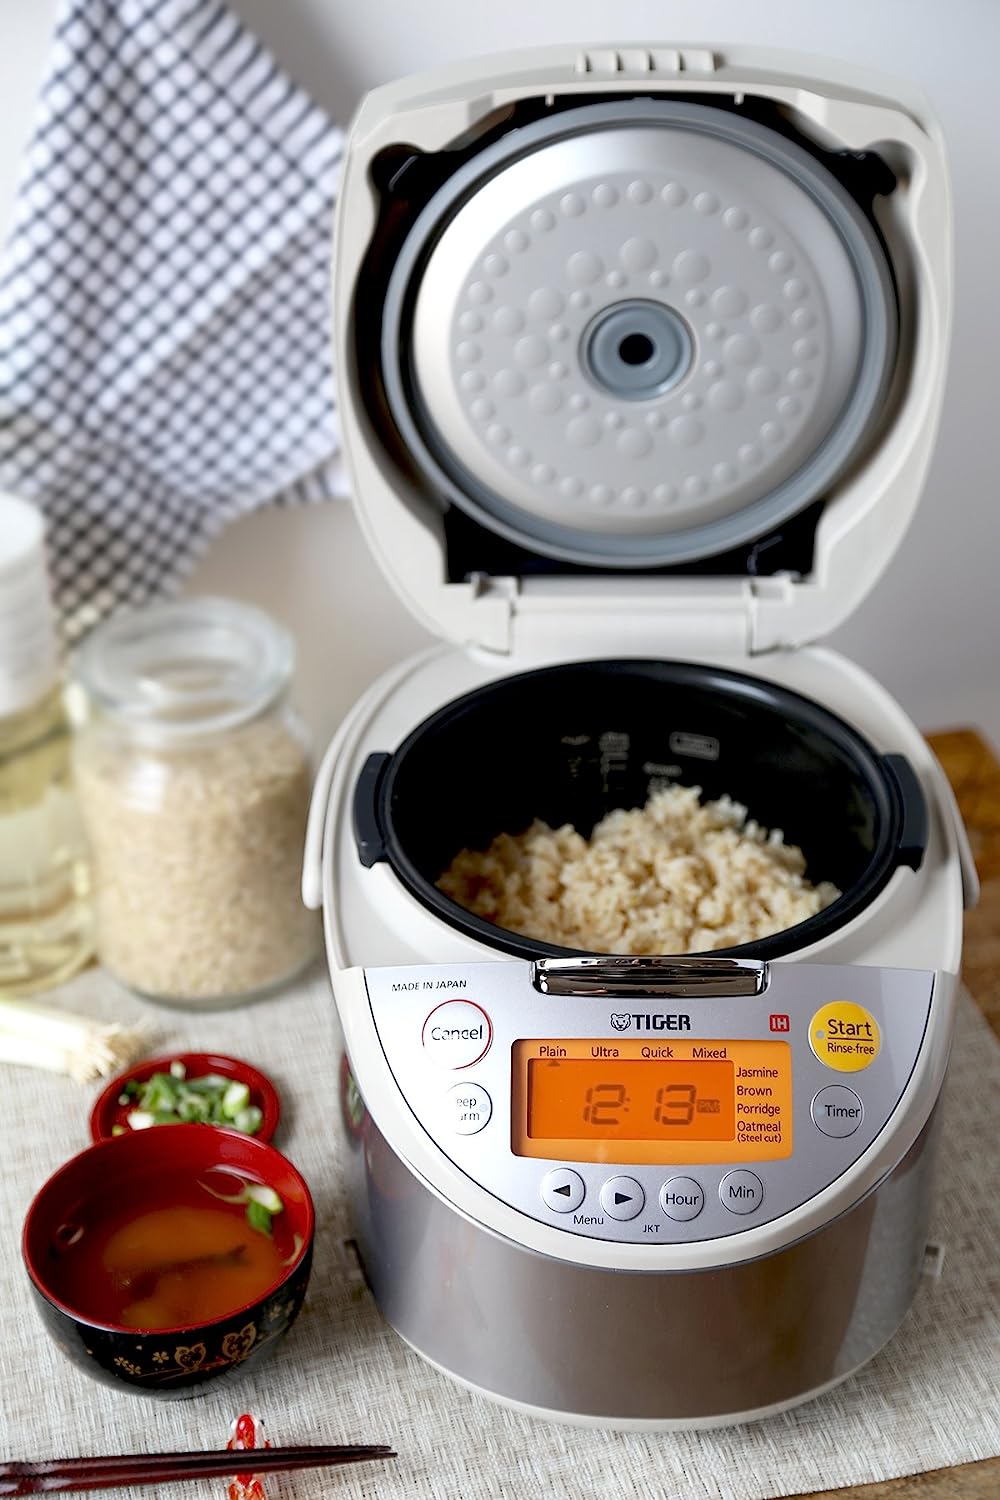 Tiger Rice Cooker Stainless Steel, 5.5-Cup